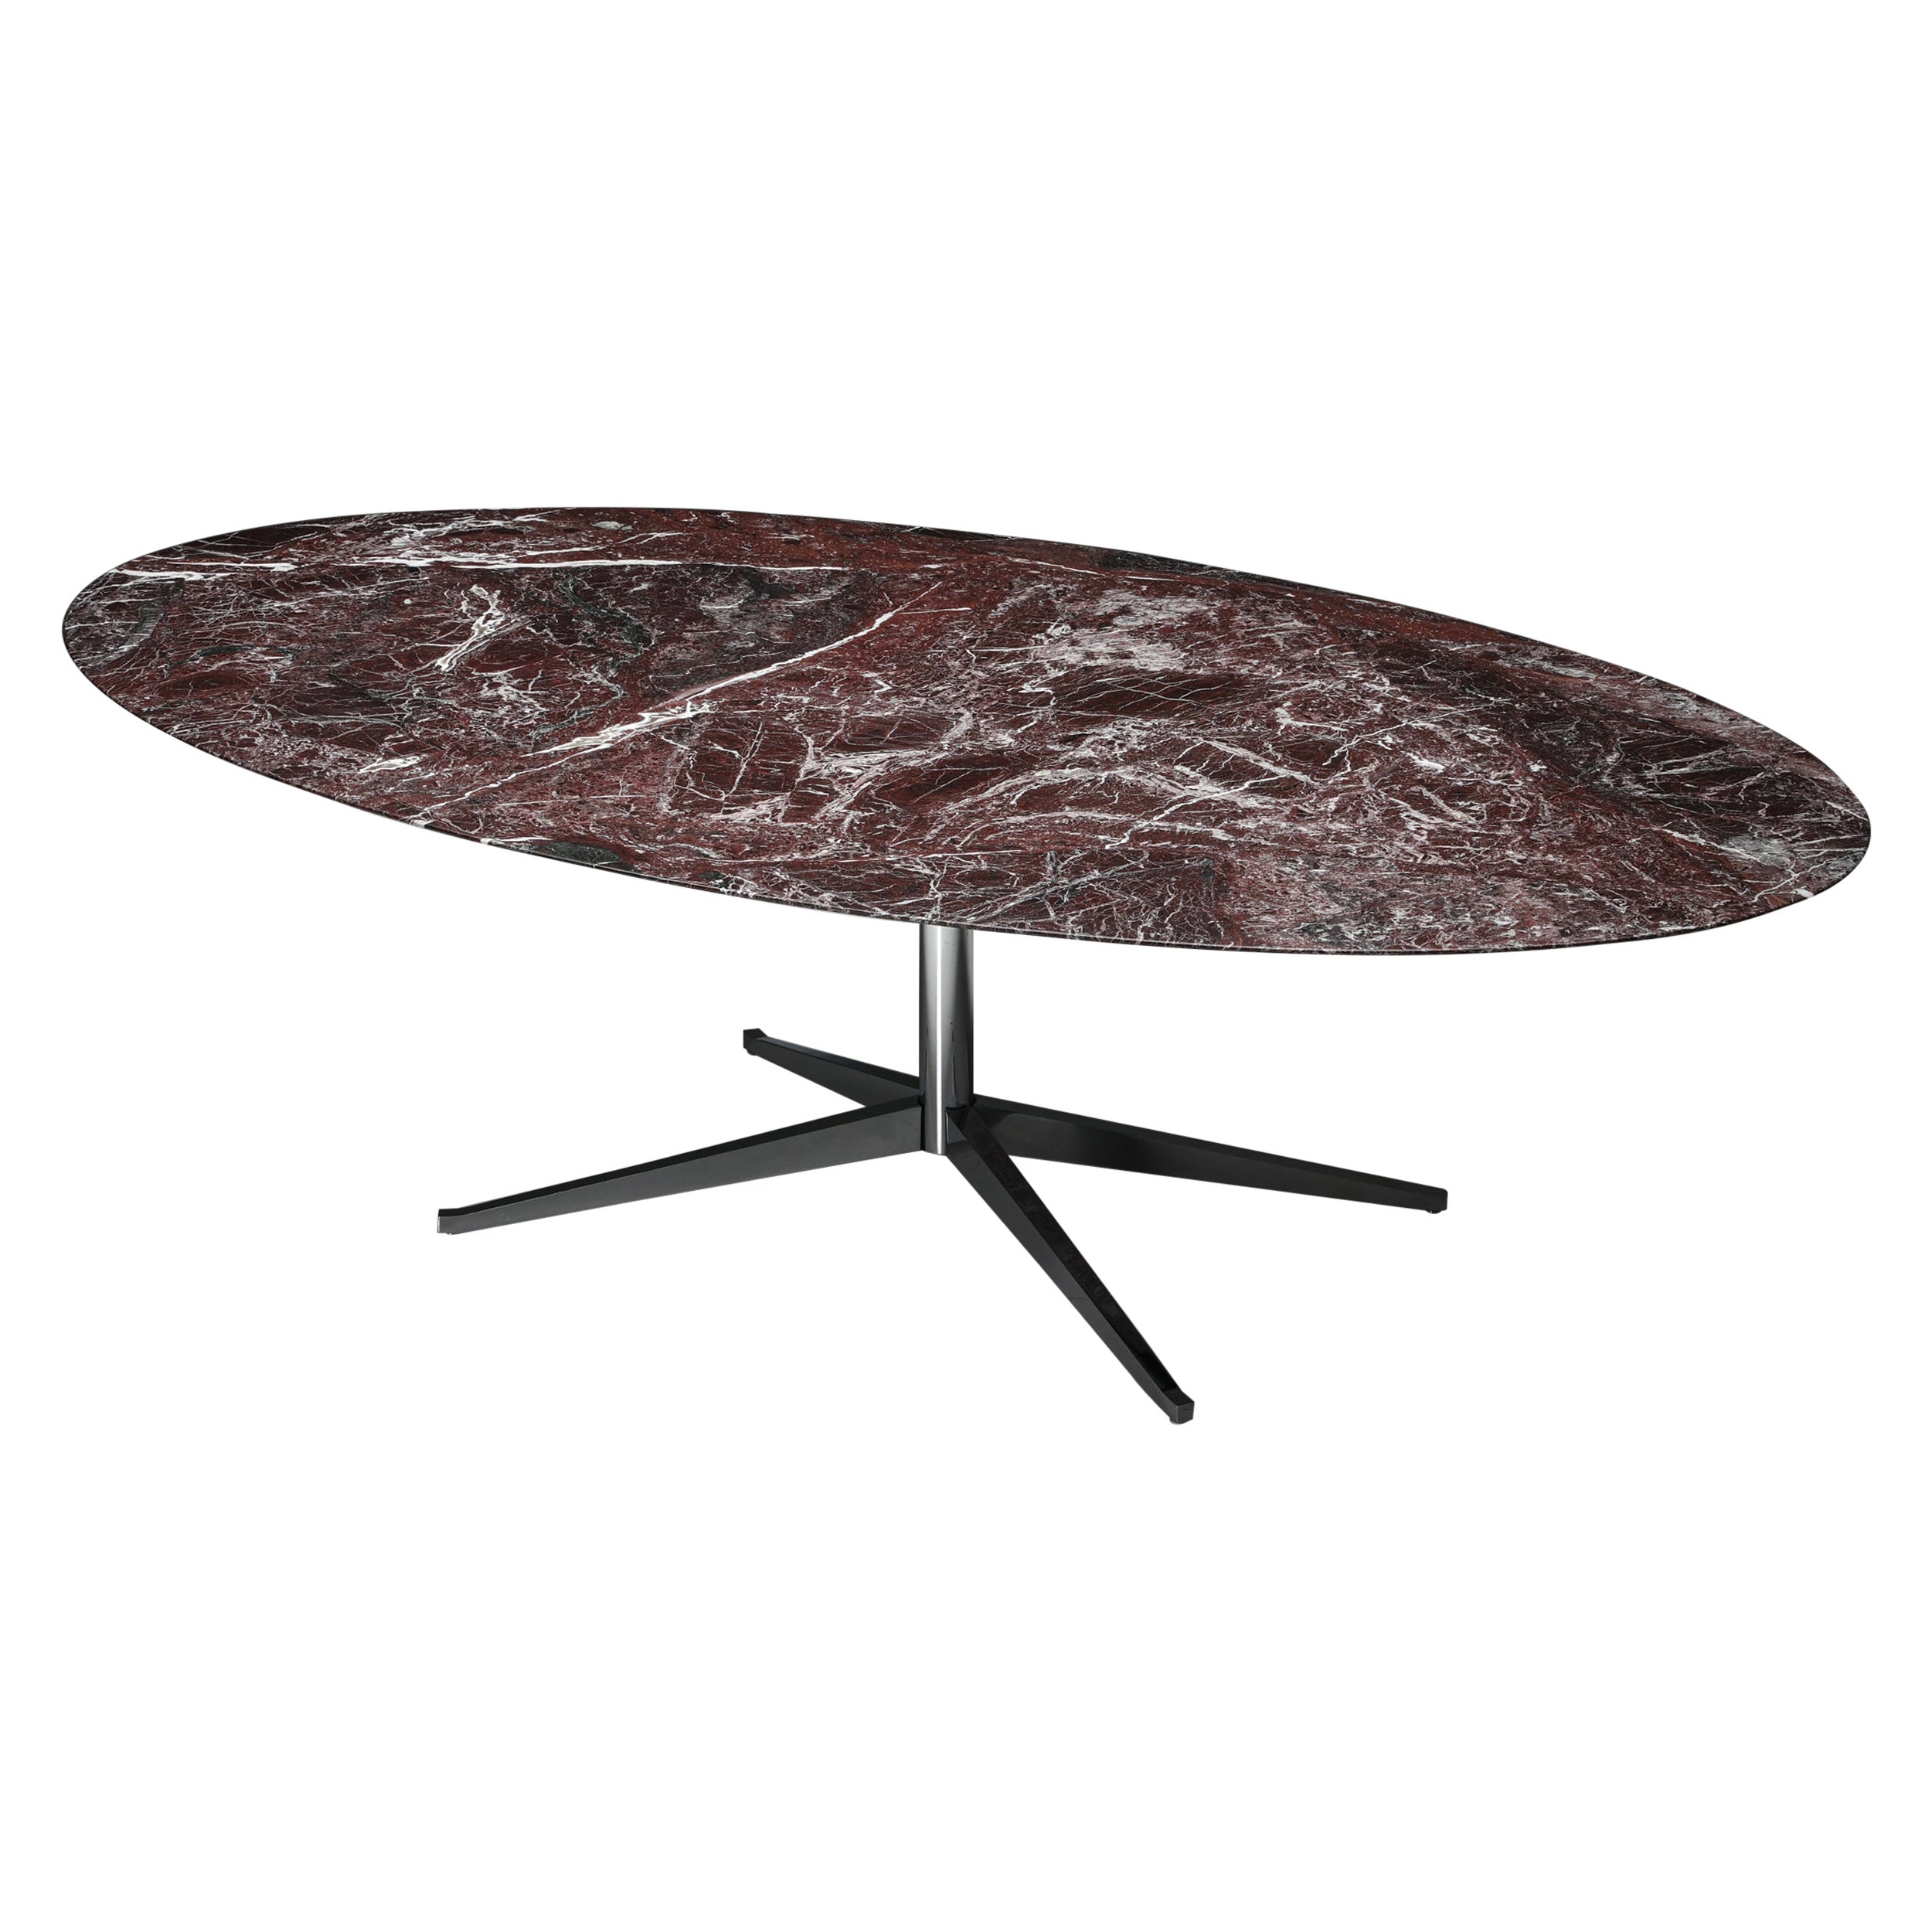 Florence Knoll Oval Burgundy Marble Dining Table, 1960s